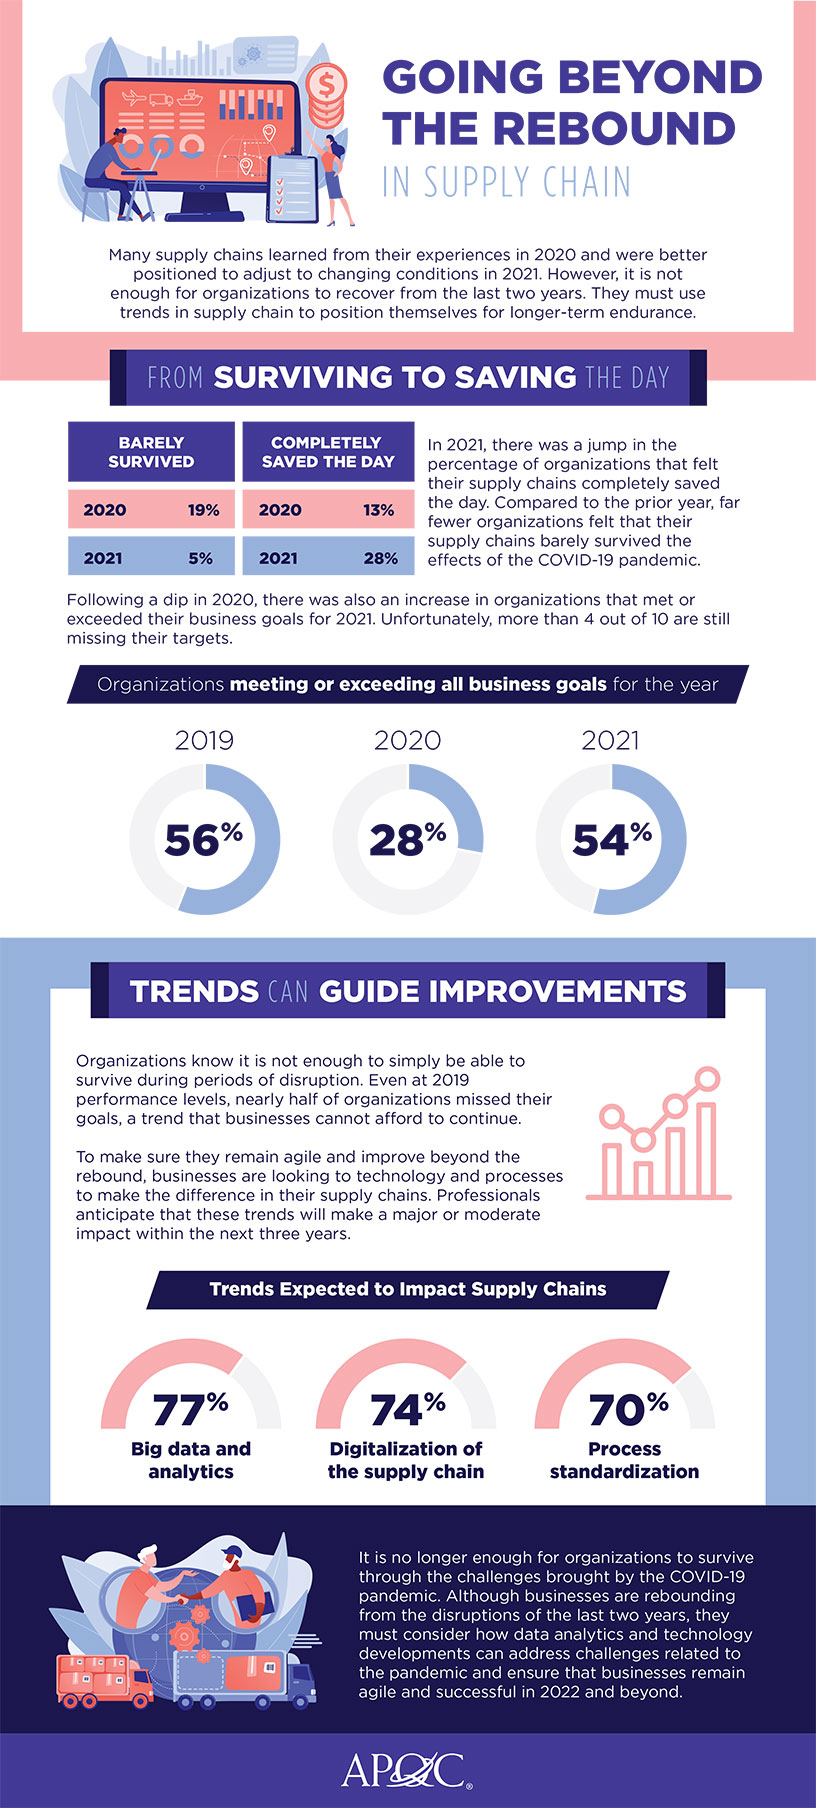 apqc infographic: going beyond the rebound in supply chain – supply chain management review